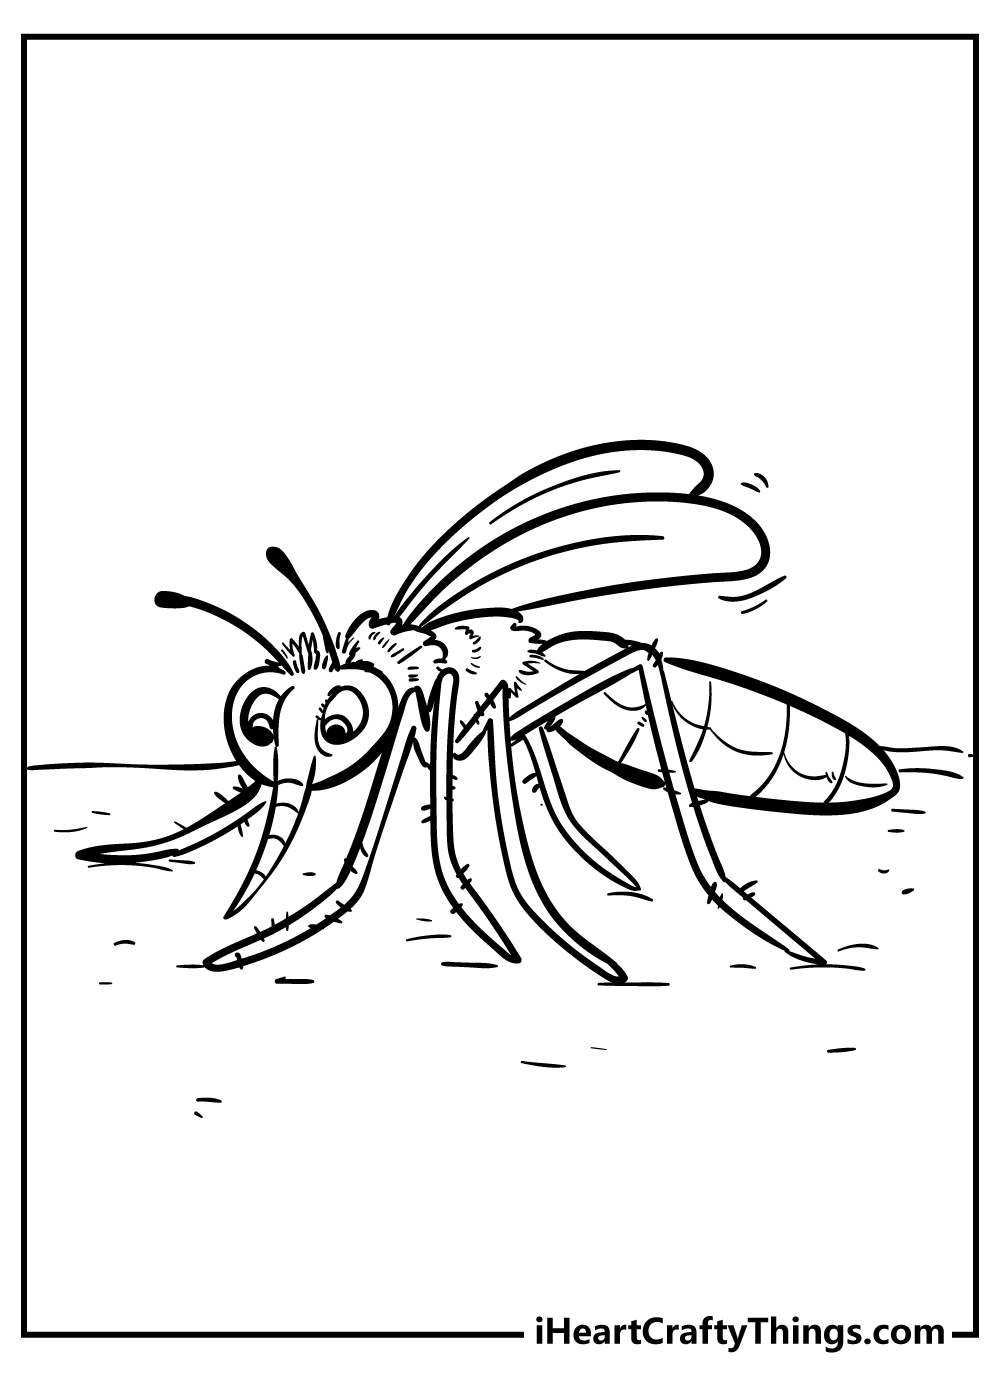 Insect Coloring Pages for adults free printable